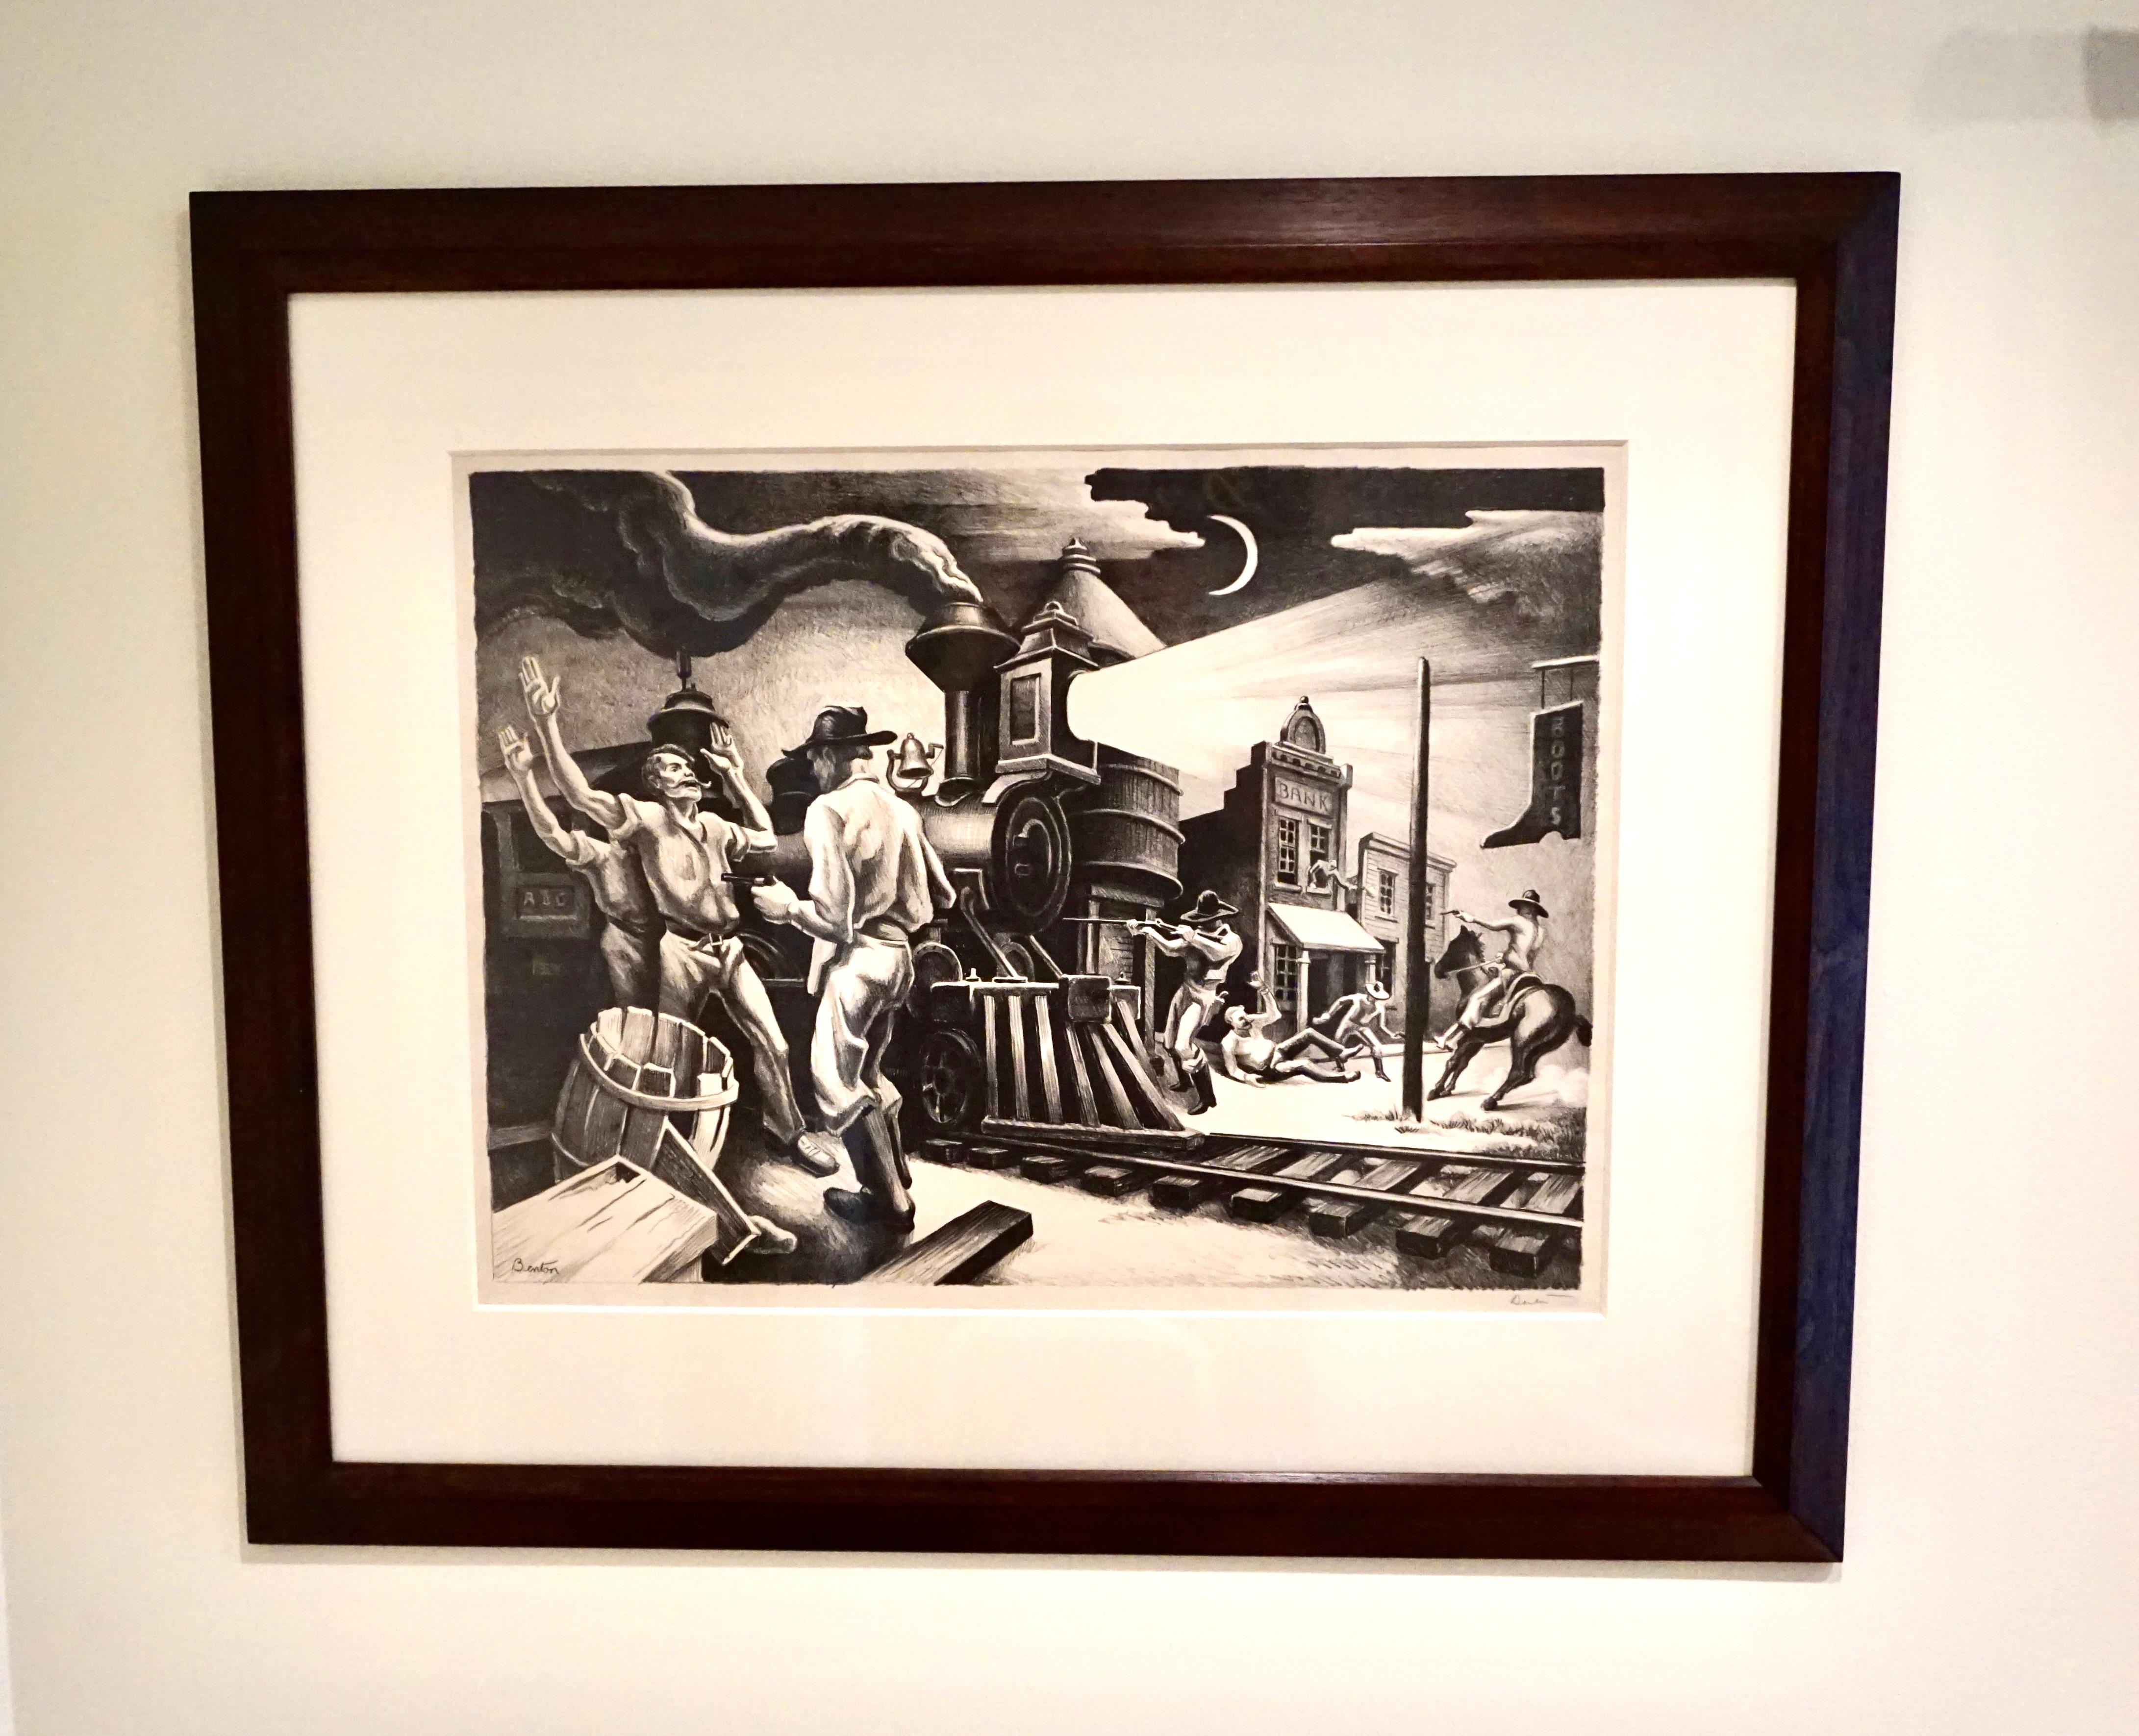 A large folio lithograph on wove paper signed in pencil lower right, from the edition of 100 published by Associated American Artists New York, with full margins, archivally matted and framed. The source of this lithograph was from a section of the